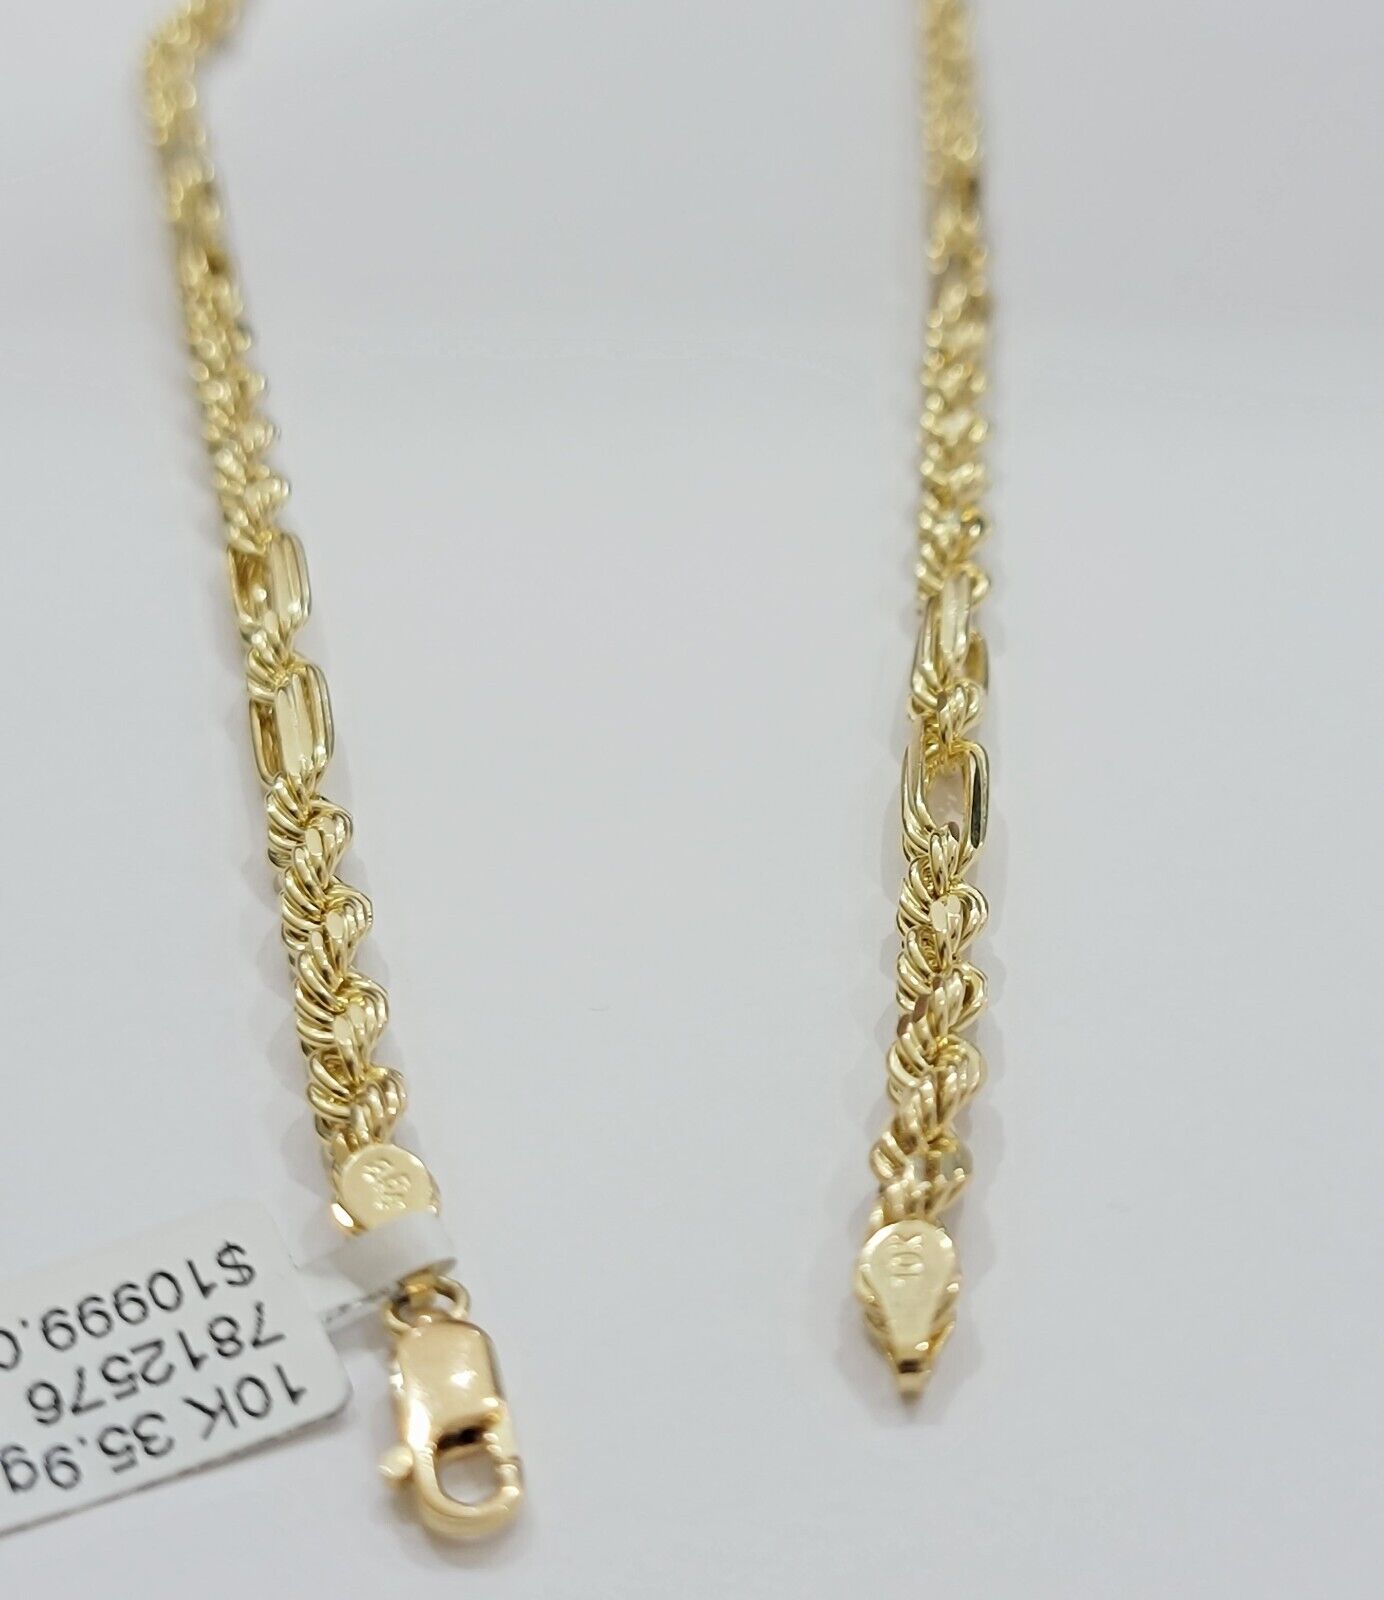 Solid 10k Gold Milano Rope Chain Necklace 20" 4.5mm Men's 10kt Yellow Gold, REAL